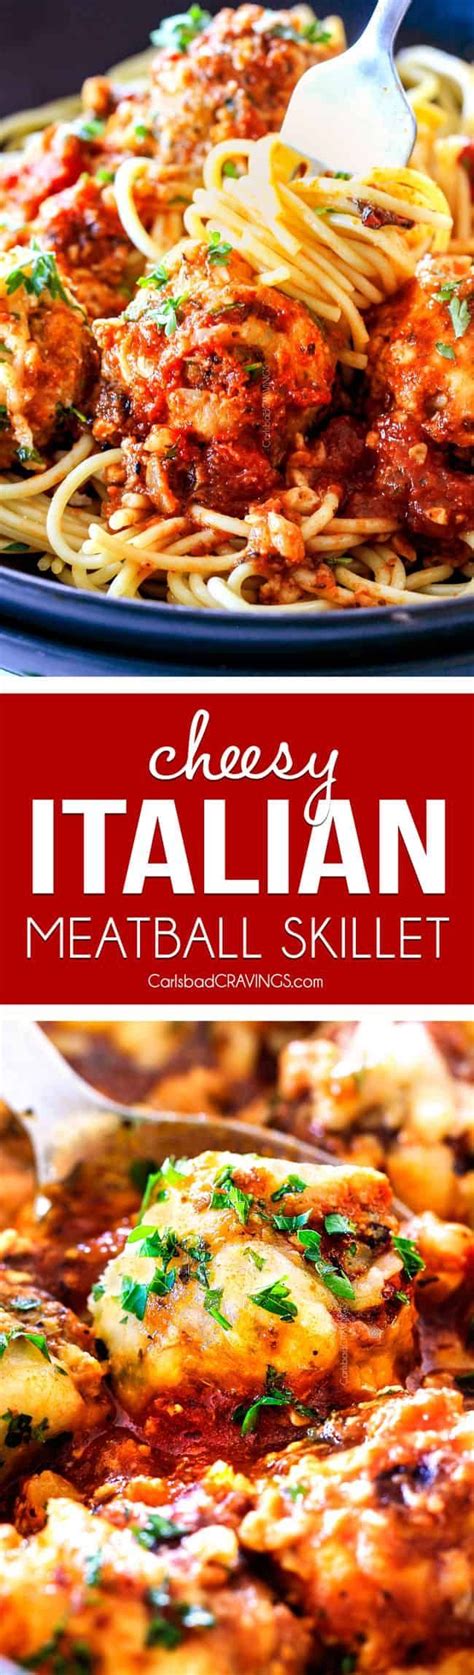 easy juicy flavorful italian meatballs bathed in rich marinara smothered in mozzarella and